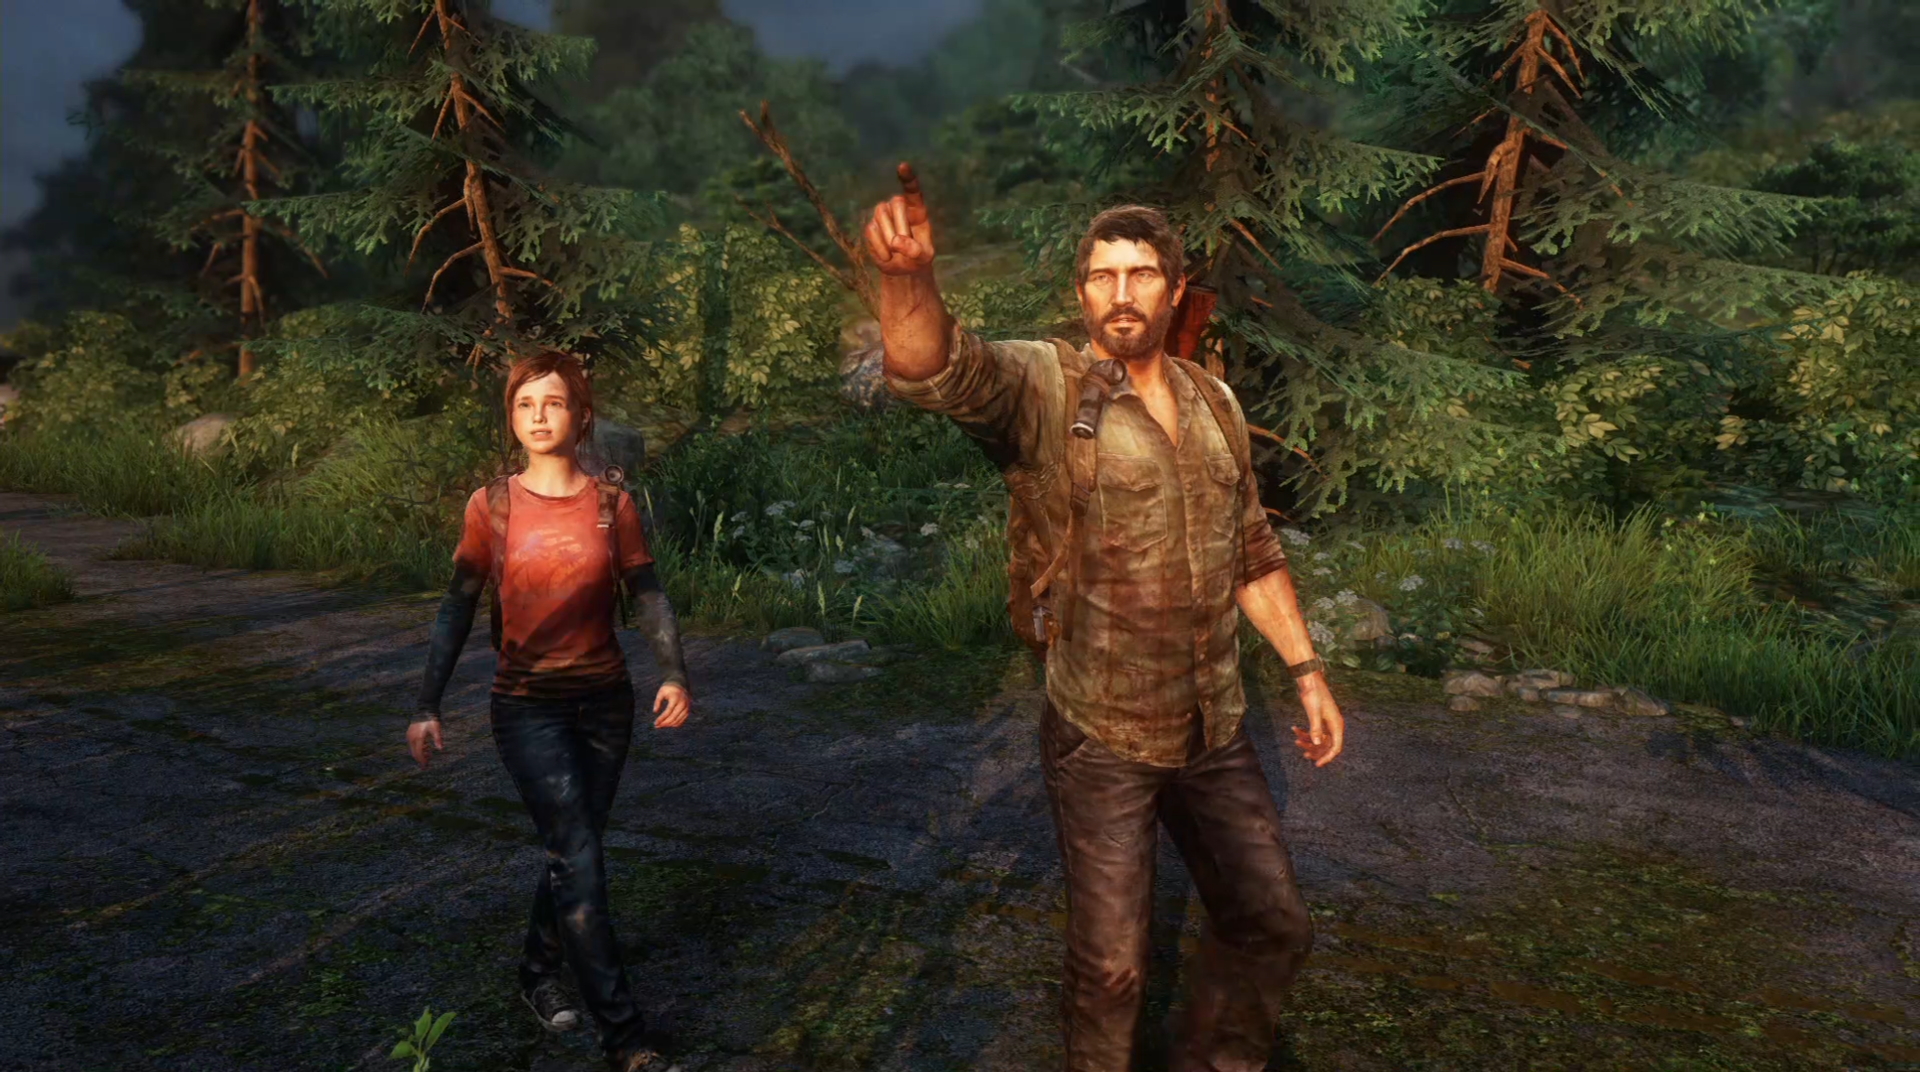 PS4 THE LAST OF US REMASTERED (US) [video game]